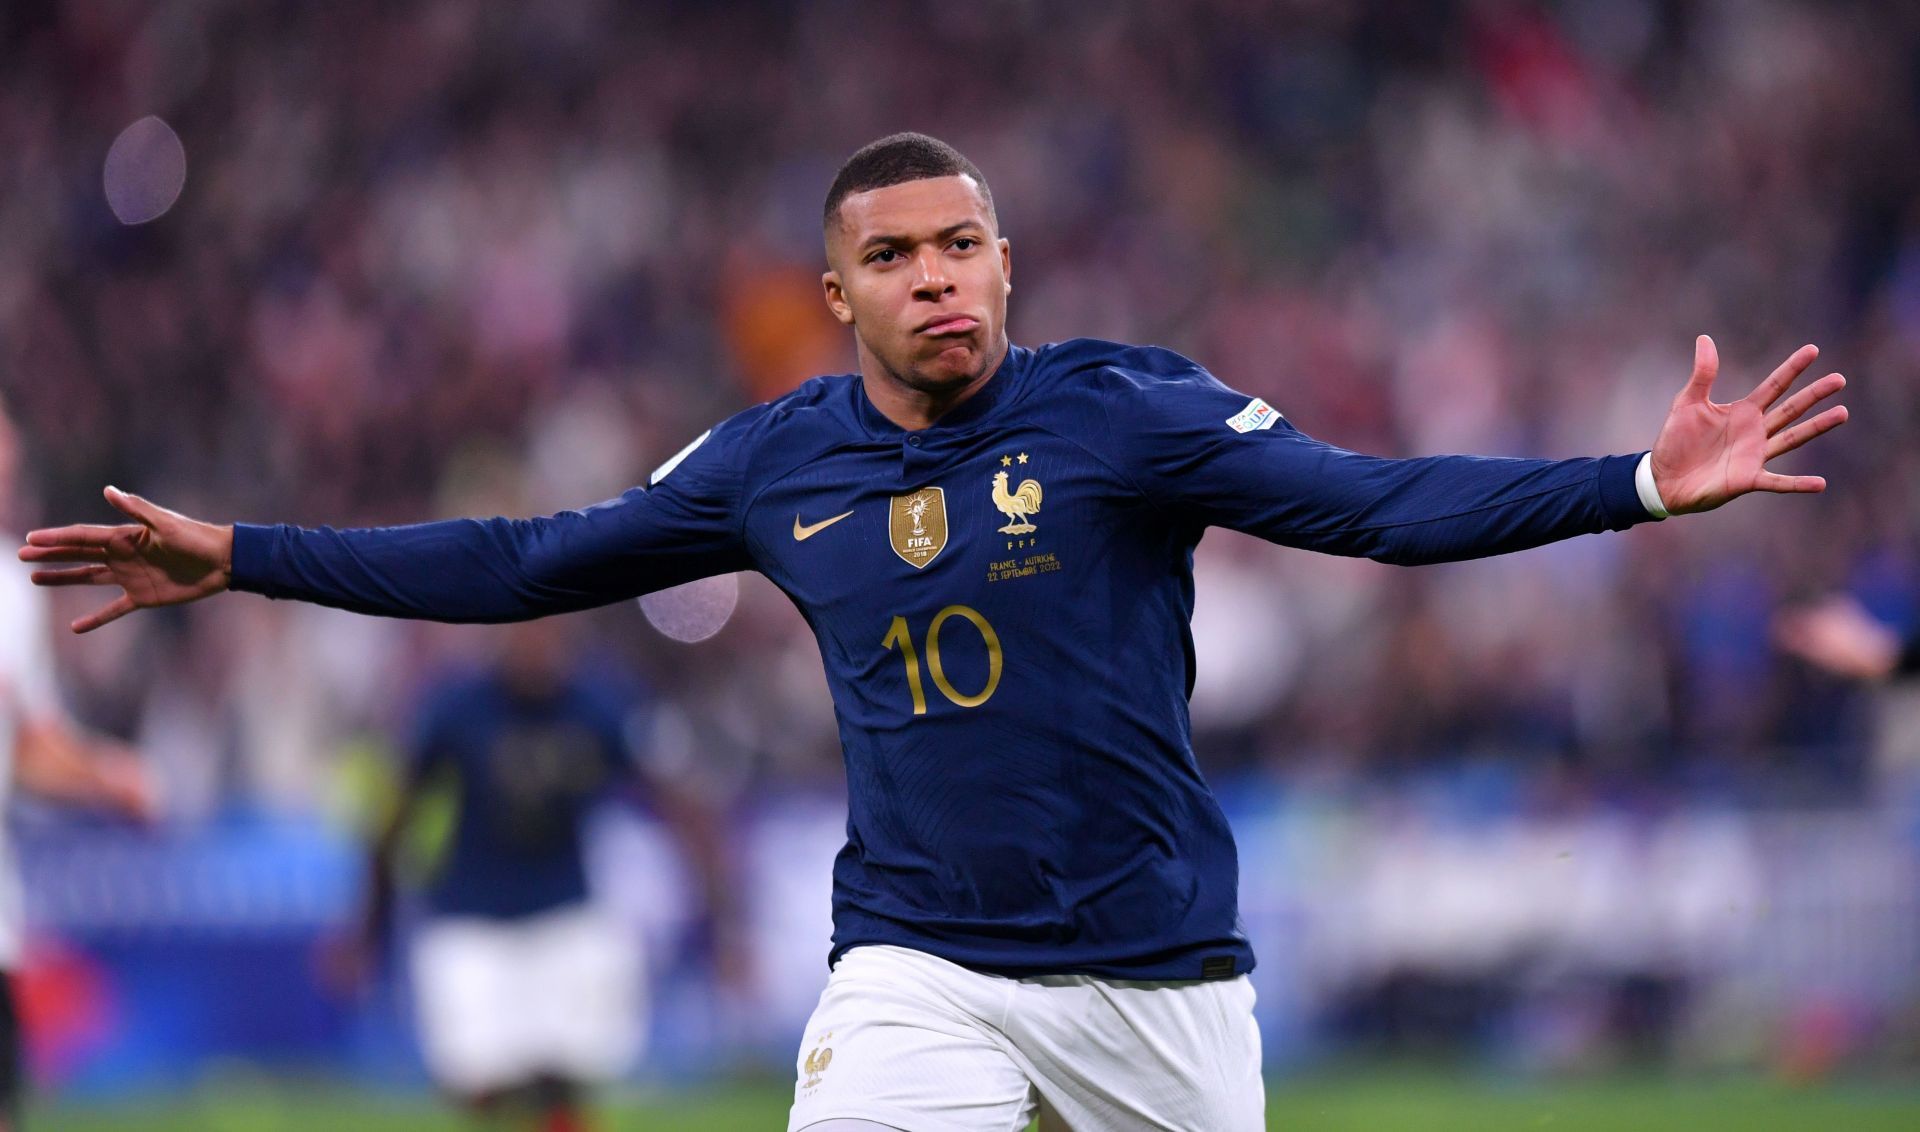 The 23-year-old will lead the attack for Les Bleus at the World Cup once again.